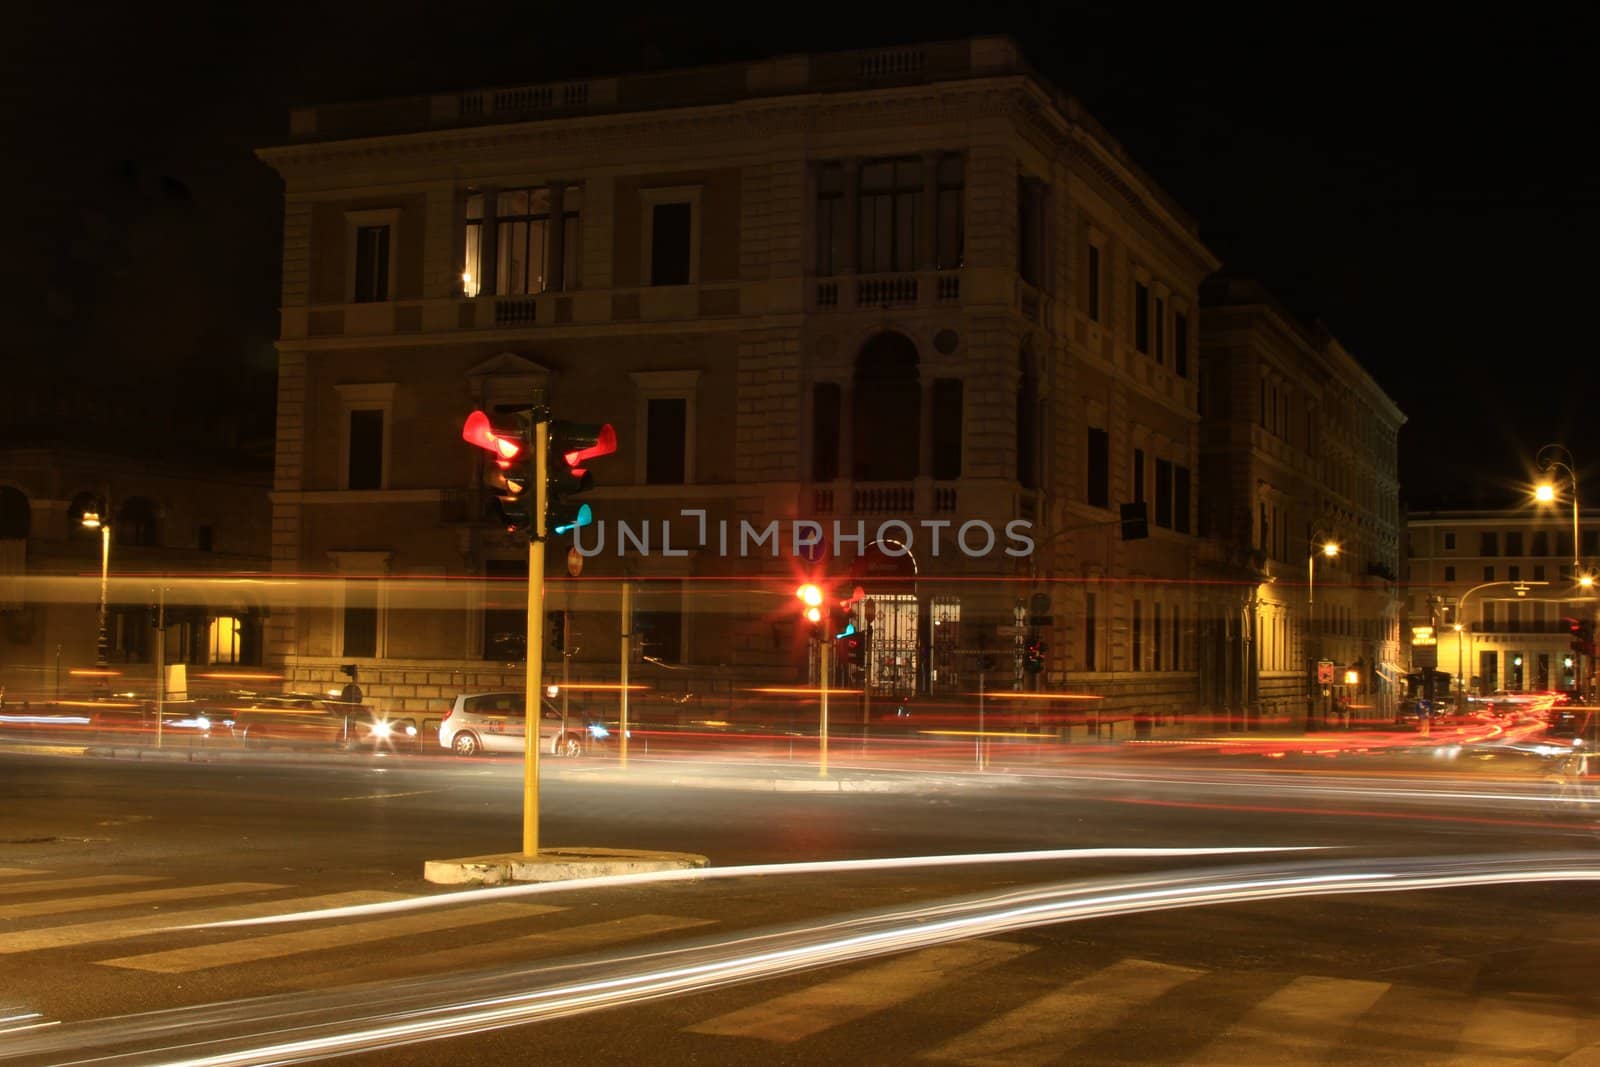 light trails in rome by olliemt